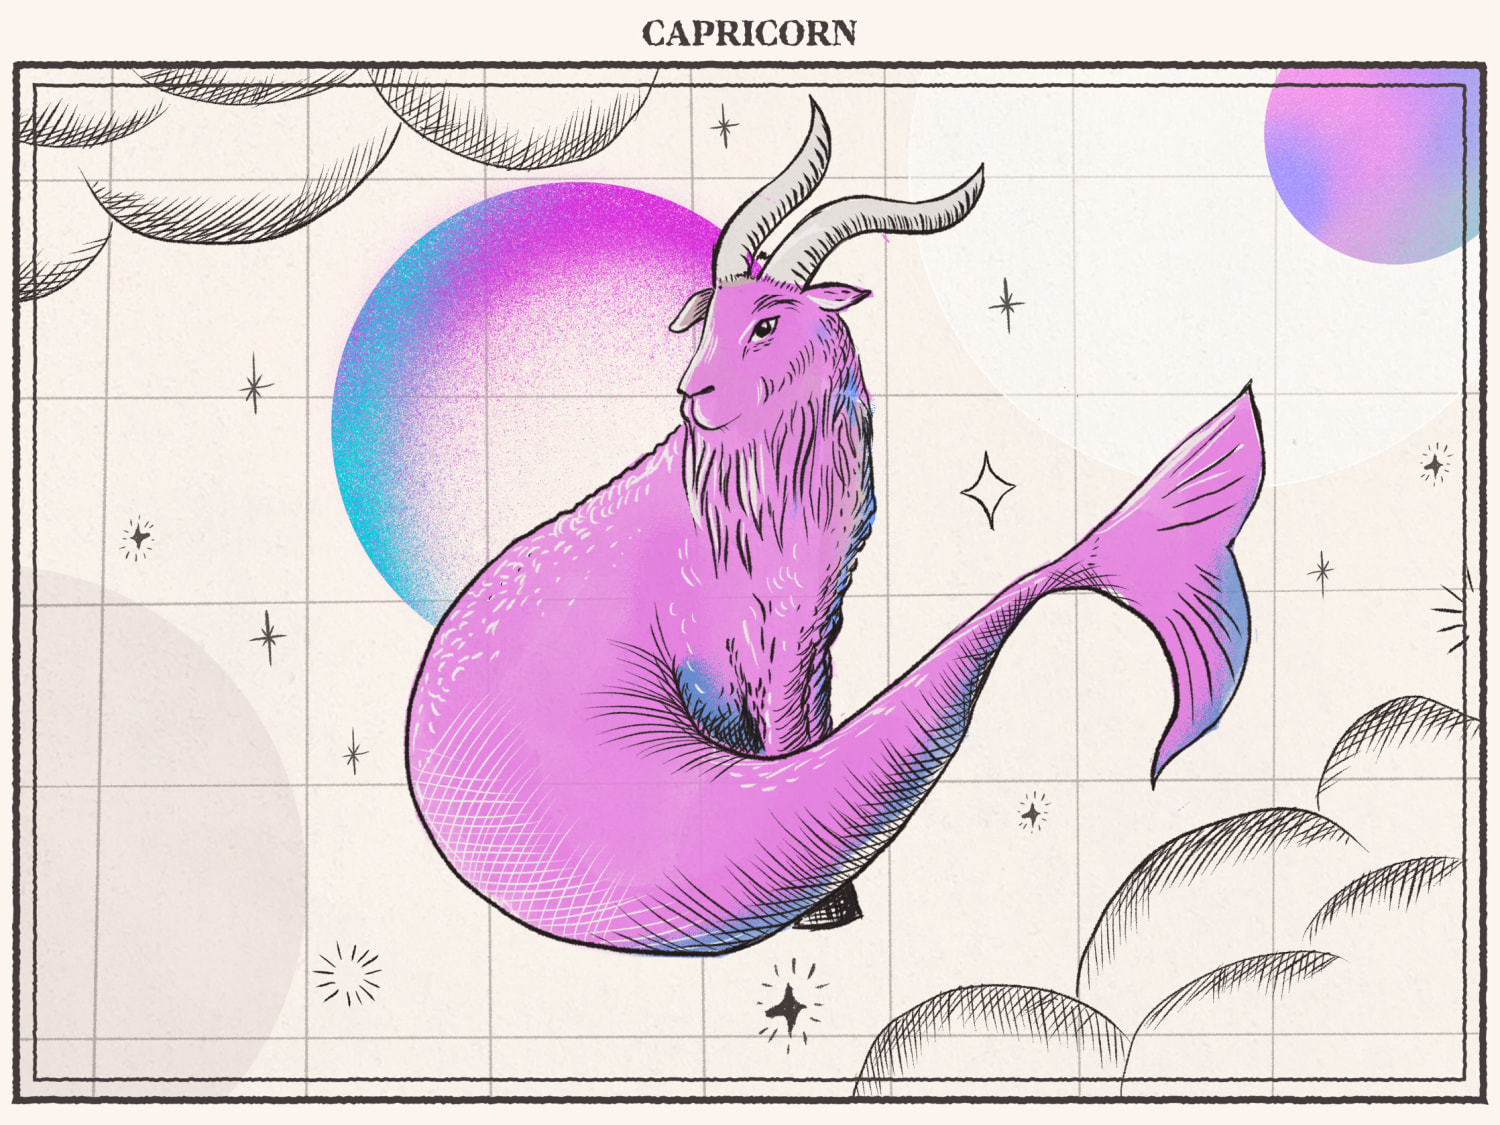 Astrology 101: What's your sun sign, rising sign, and moon sign?